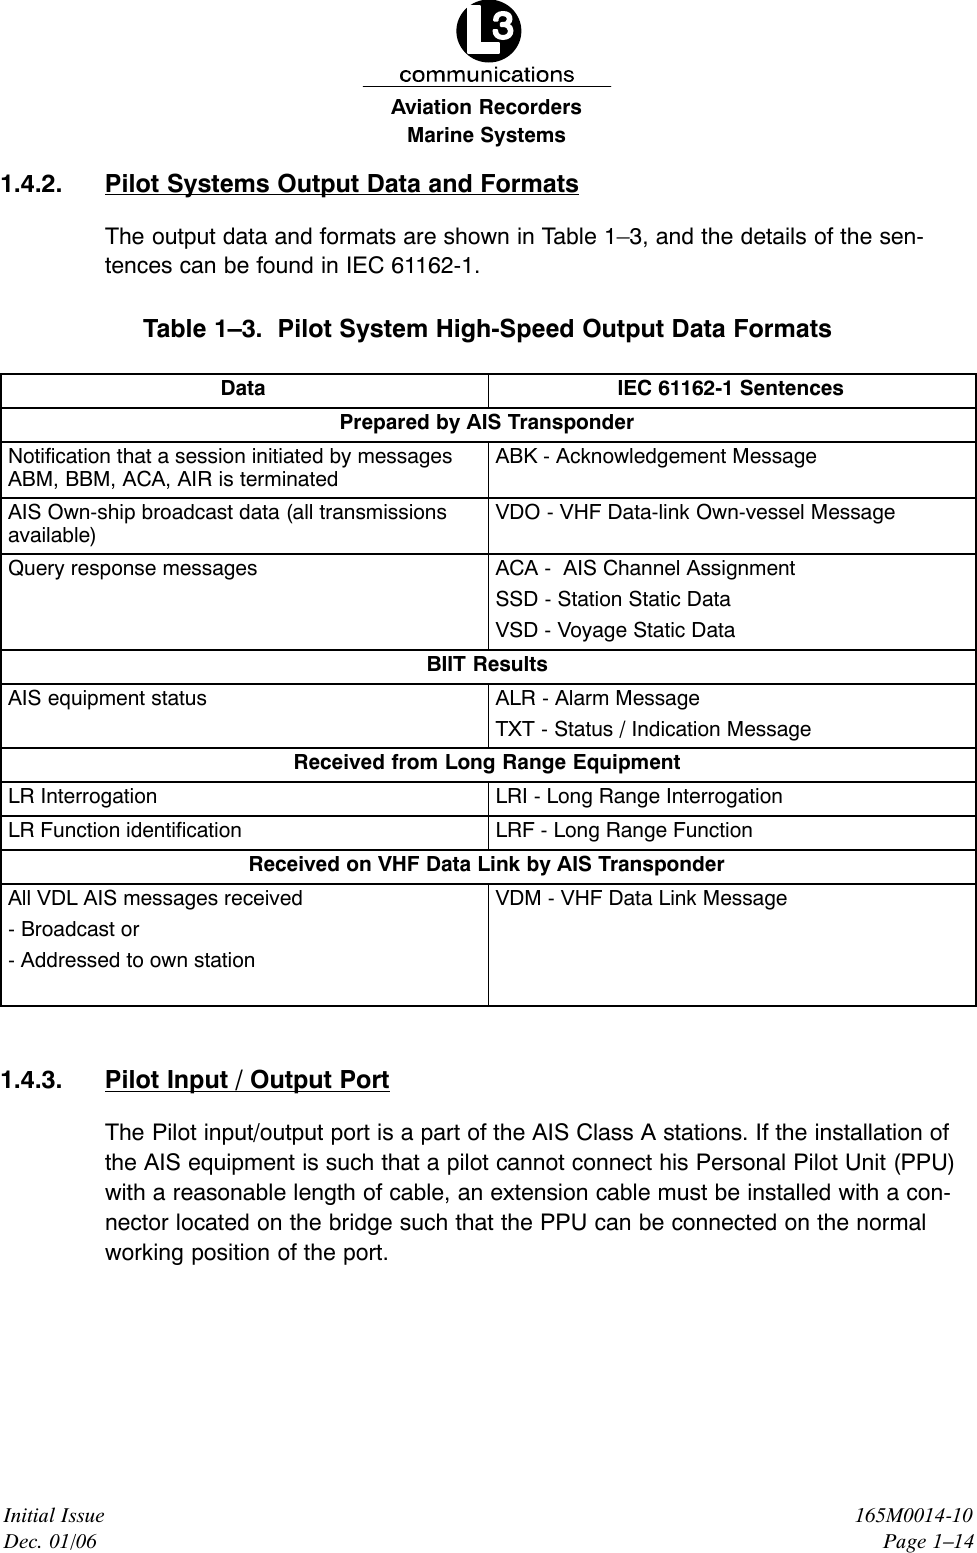 Marine SystemsAviation RecordersInitial IssueDec. 01/06165M0014-10Page 1–141.4.2. Pilot Systems Output Data and FormatsThe output data and formats are shown in Table 1–3, and the details of the sen-tences can be found in IEC 61162-1.Table 1–3.  Pilot System High-Speed Output Data FormatsData IEC 61162-1 SentencesPrepared by AIS TransponderNotification that a session initiated by messagesABM, BBM, ACA, AIR is terminatedABK - Acknowledgement MessageAIS Own-ship broadcast data (all transmissionsavailable)VDO - VHF Data-link Own-vessel MessageQuery response messages ACA -  AIS Channel AssignmentSSD - Station Static DataVSD - Voyage Static DataBIIT ResultsAIS equipment status ALR - Alarm MessageTXT - Status / Indication MessageReceived from Long Range EquipmentLR Interrogation LRI - Long Range InterrogationLR Function identification LRF - Long Range FunctionReceived on VHF Data Link by AIS TransponderAll VDL AIS messages received- Broadcast or- Addressed to own stationVDM - VHF Data Link Message1.4.3. Pilot Input / Output PortThe Pilot input/output port is a part of the AIS Class A stations. If the installation ofthe AIS equipment is such that a pilot cannot connect his Personal Pilot Unit (PPU)with a reasonable length of cable, an extension cable must be installed with a con-nector located on the bridge such that the PPU can be connected on the normalworking position of the port.